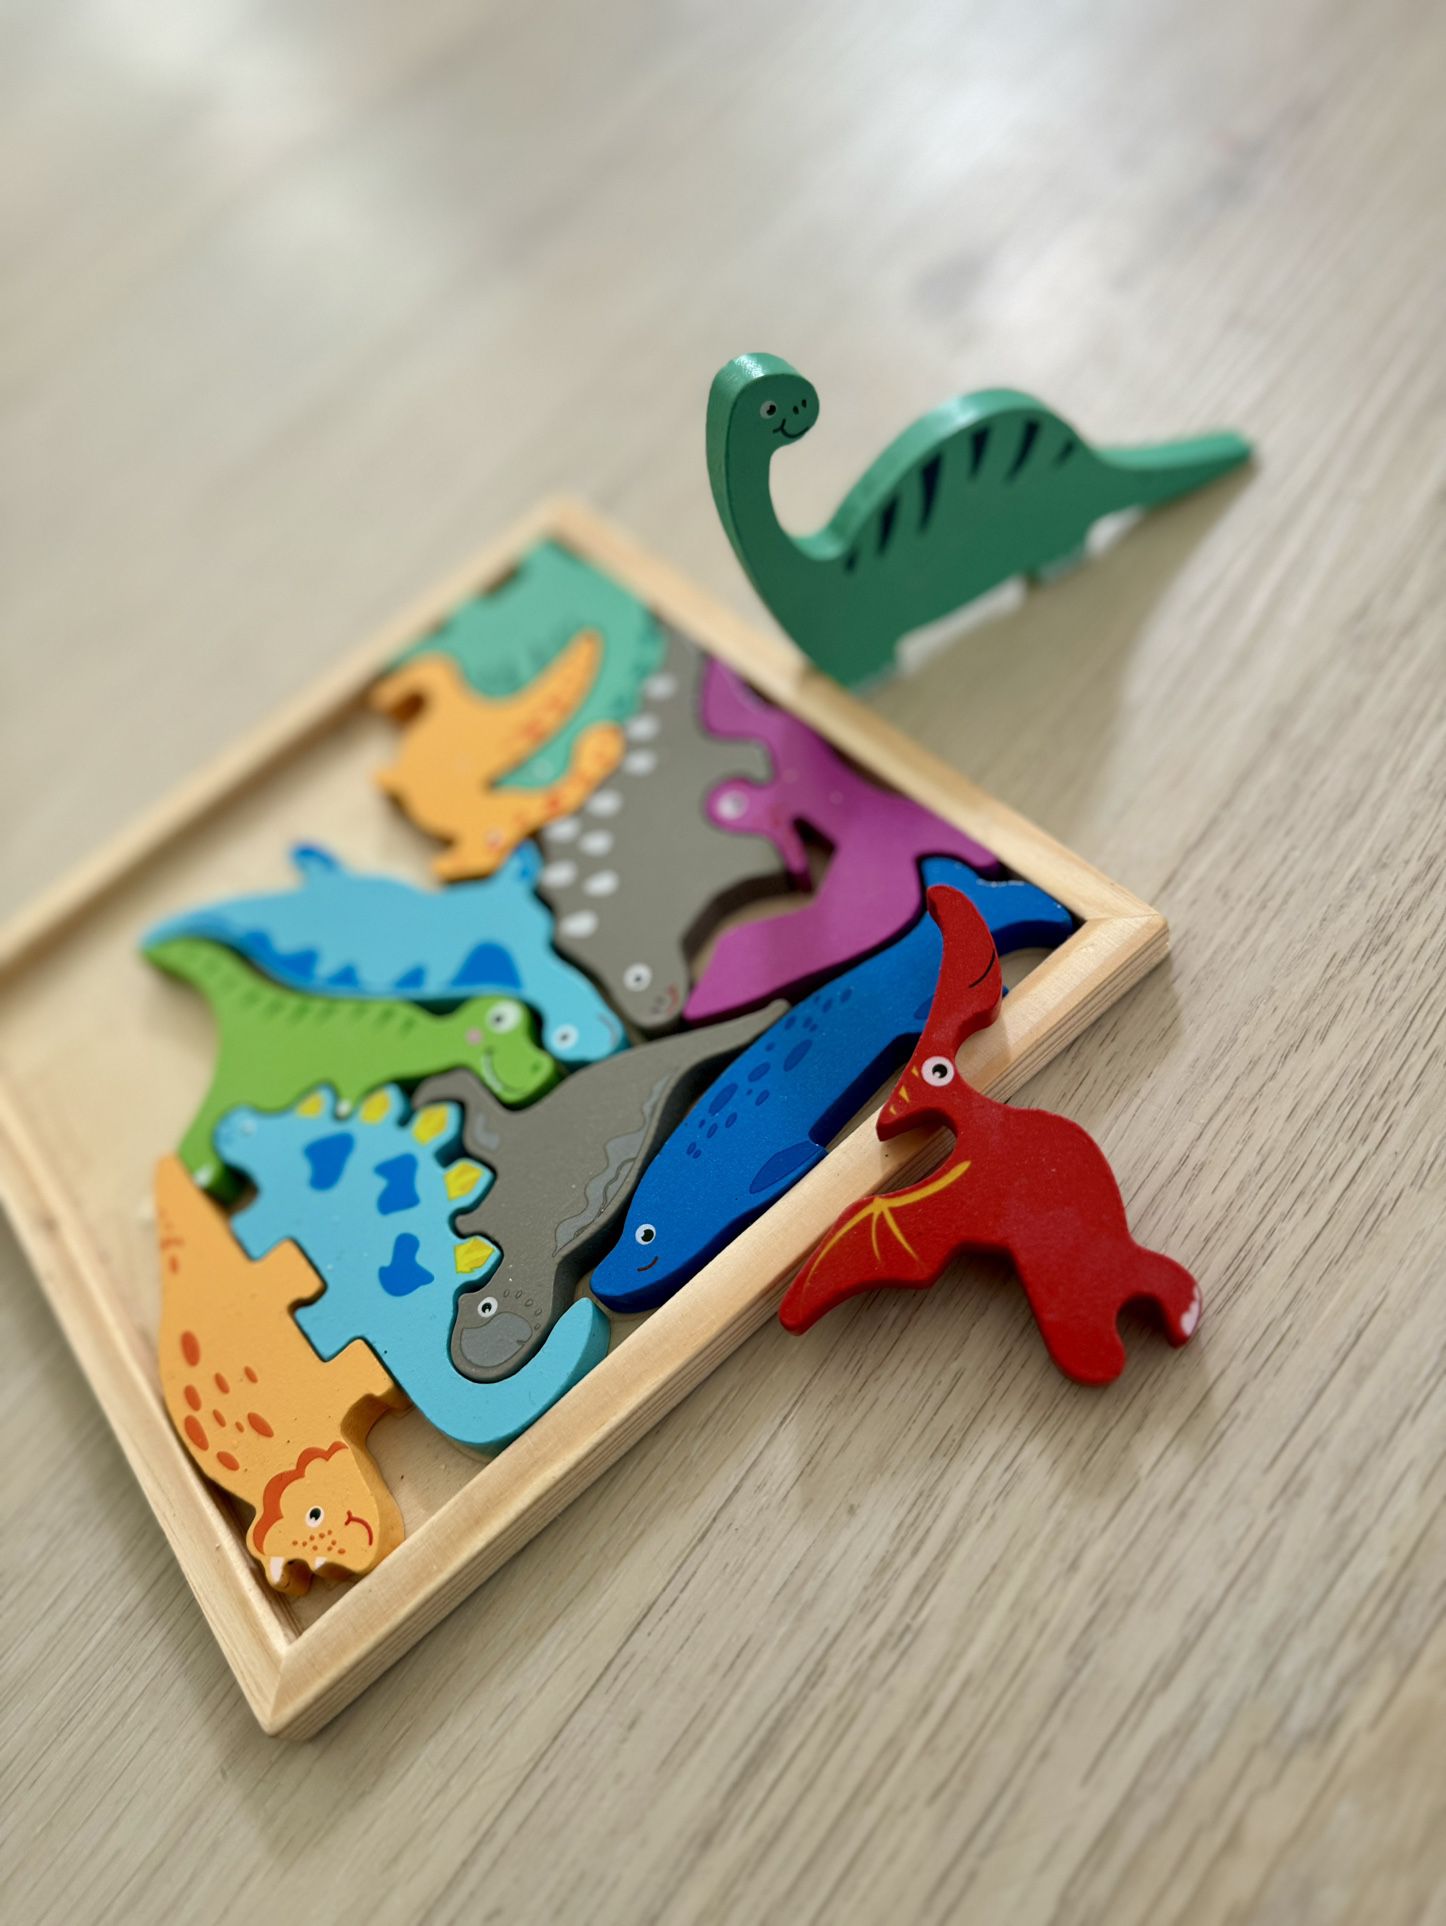 Like New Montessori Colorful Wooden Dinosaur 🦕 Puzzle Educational Kids Toy